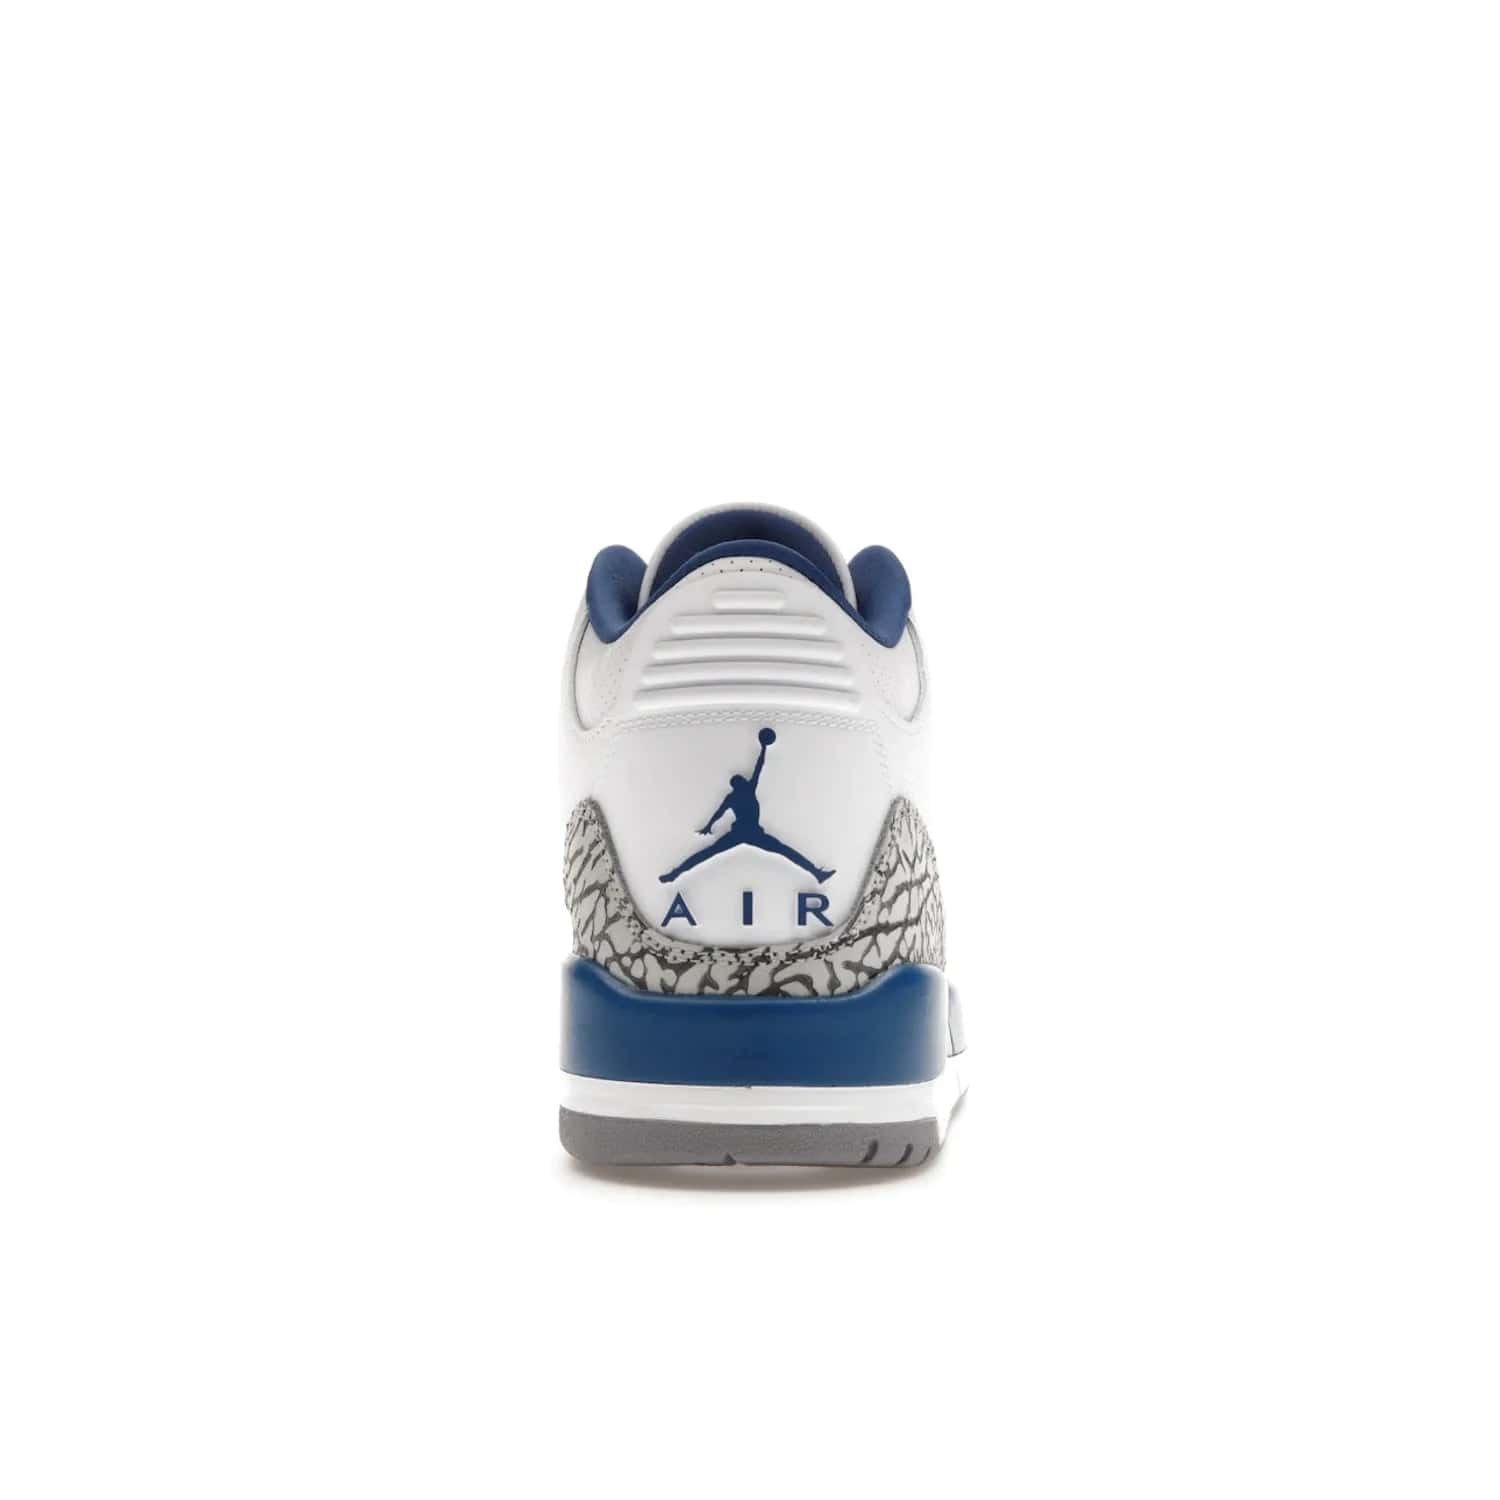 Jordan 3 Retro Wizards - Image 28 - Only at www.BallersClubKickz.com - ##
Special tribute sneaker from Jordan Brand to Michael Jordan's time with the Washington Wizards. Iconic white upper, orange Jumpman logo, blue accents, metallic copper details, and cement grey outsole. Buy the Air Jordan 3 Retro Wizards April 29, 2023.